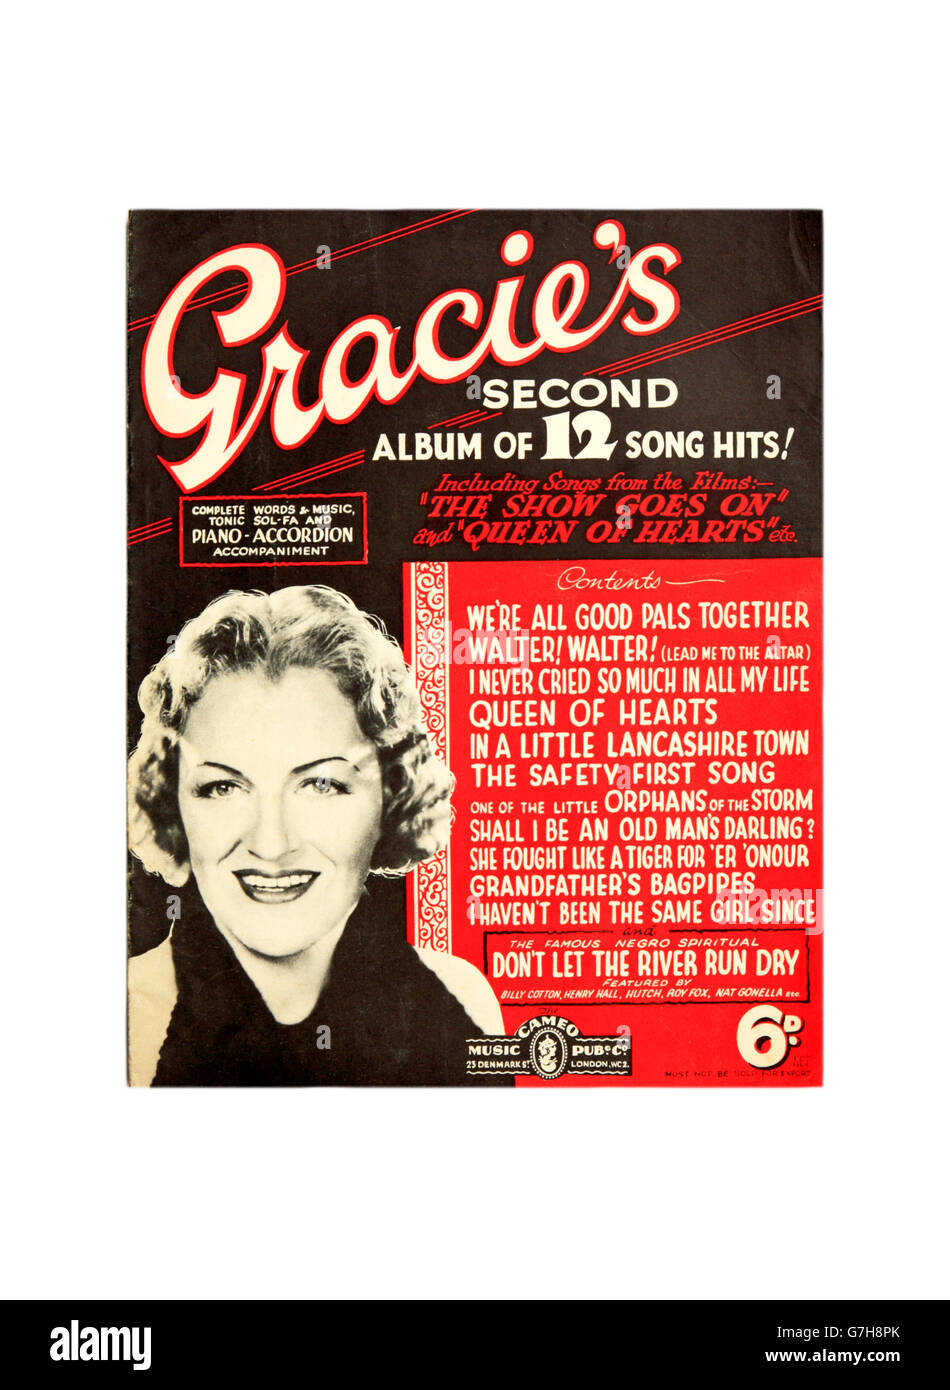 A sheet music cover of Gracie Fields second album of 12 song hits. Stock Photo